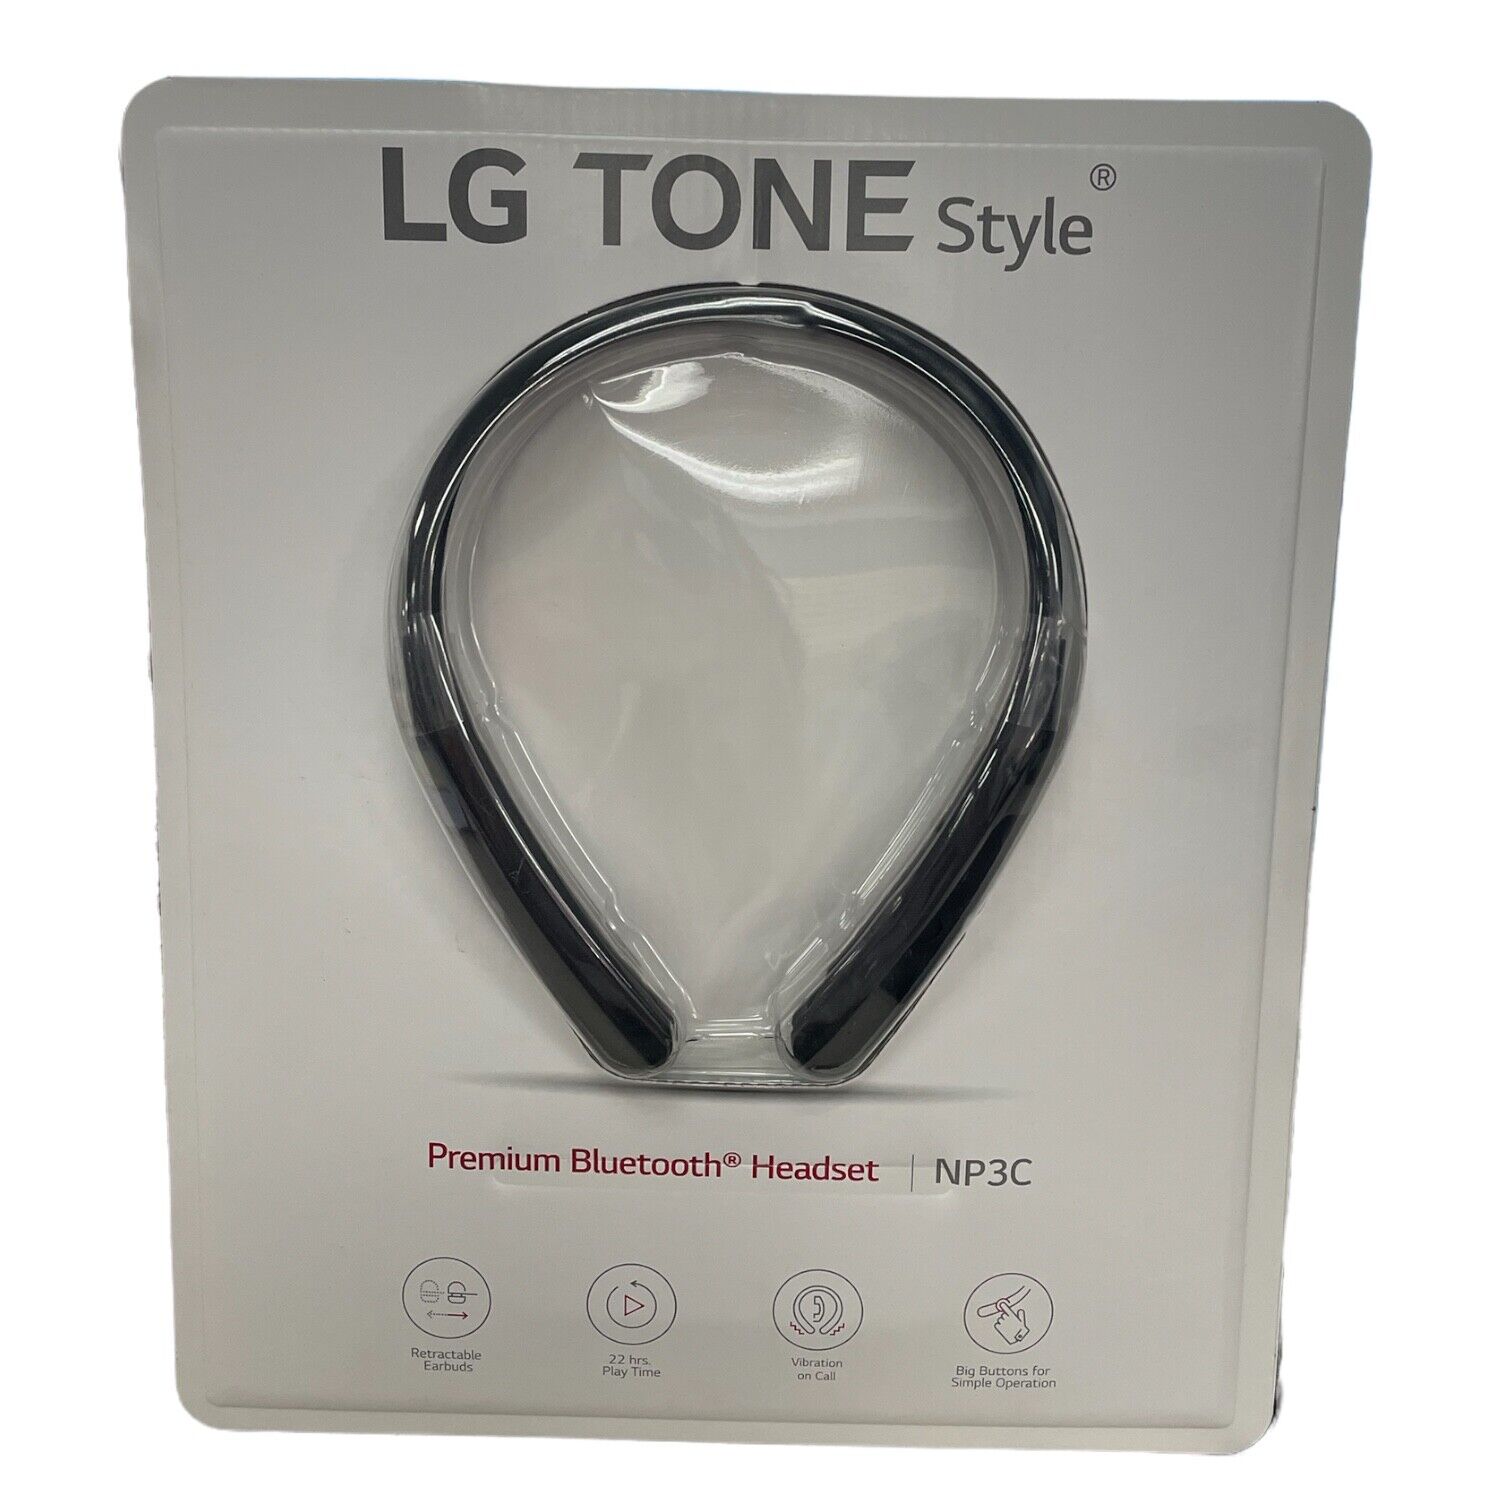 *Distressed PKG* LG TONE NP3C Wireless Stereo Headset with Retractable Earbuds